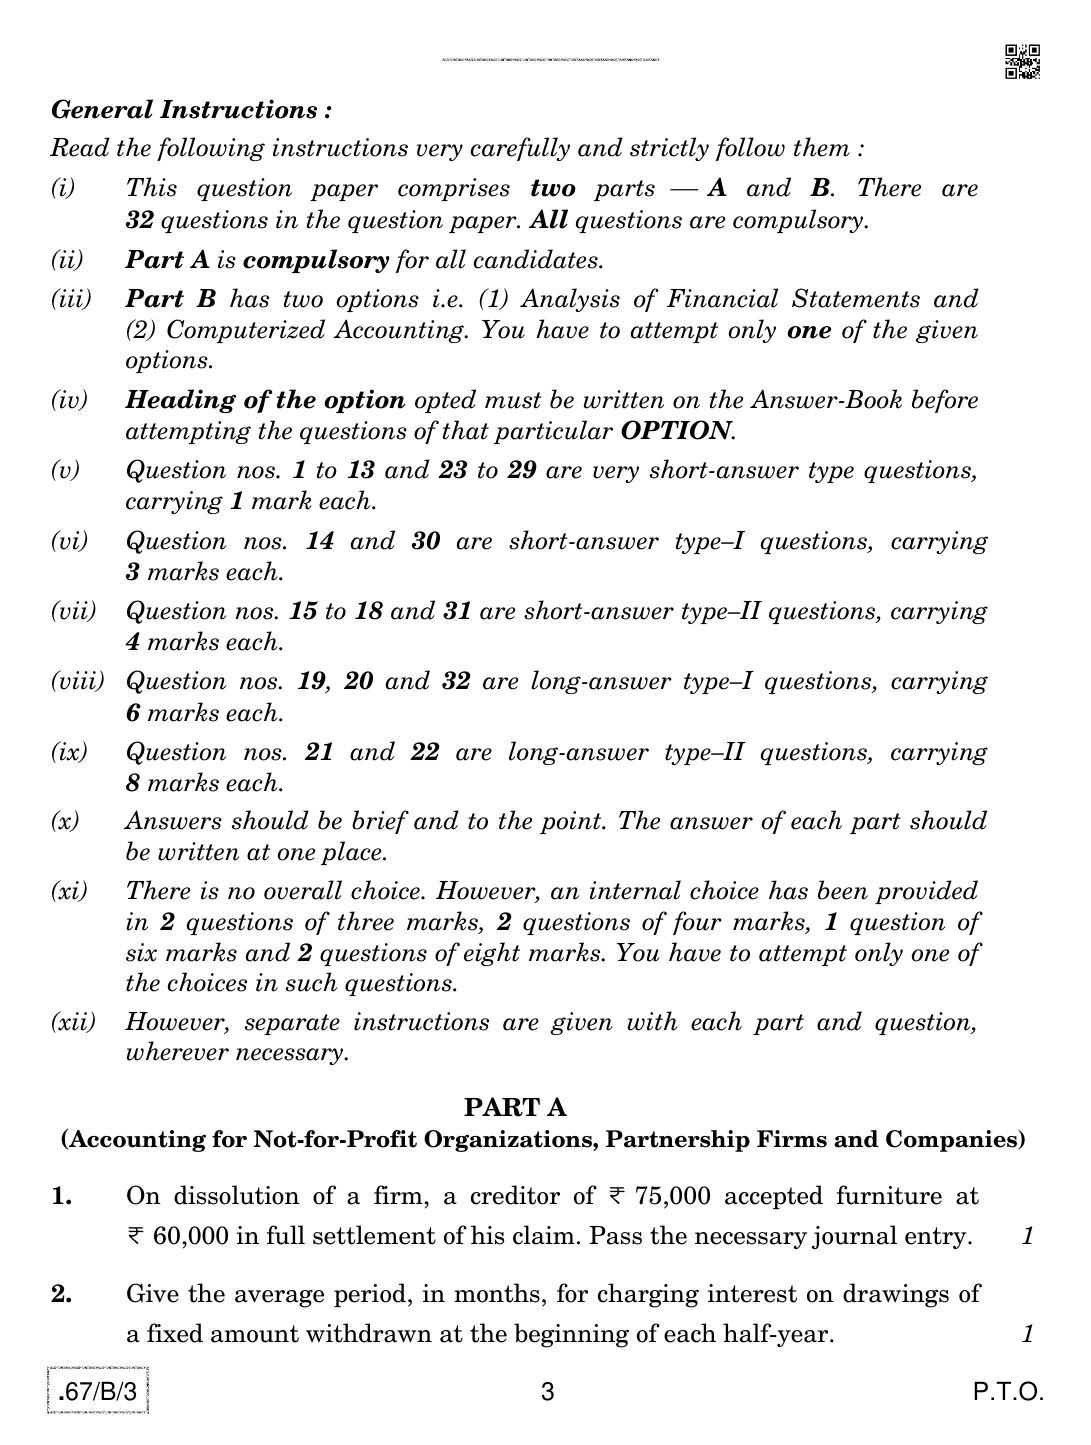 CBSE Class 12 67-C-3 - Accountancy 2020 Compartment Question Paper - Page 3